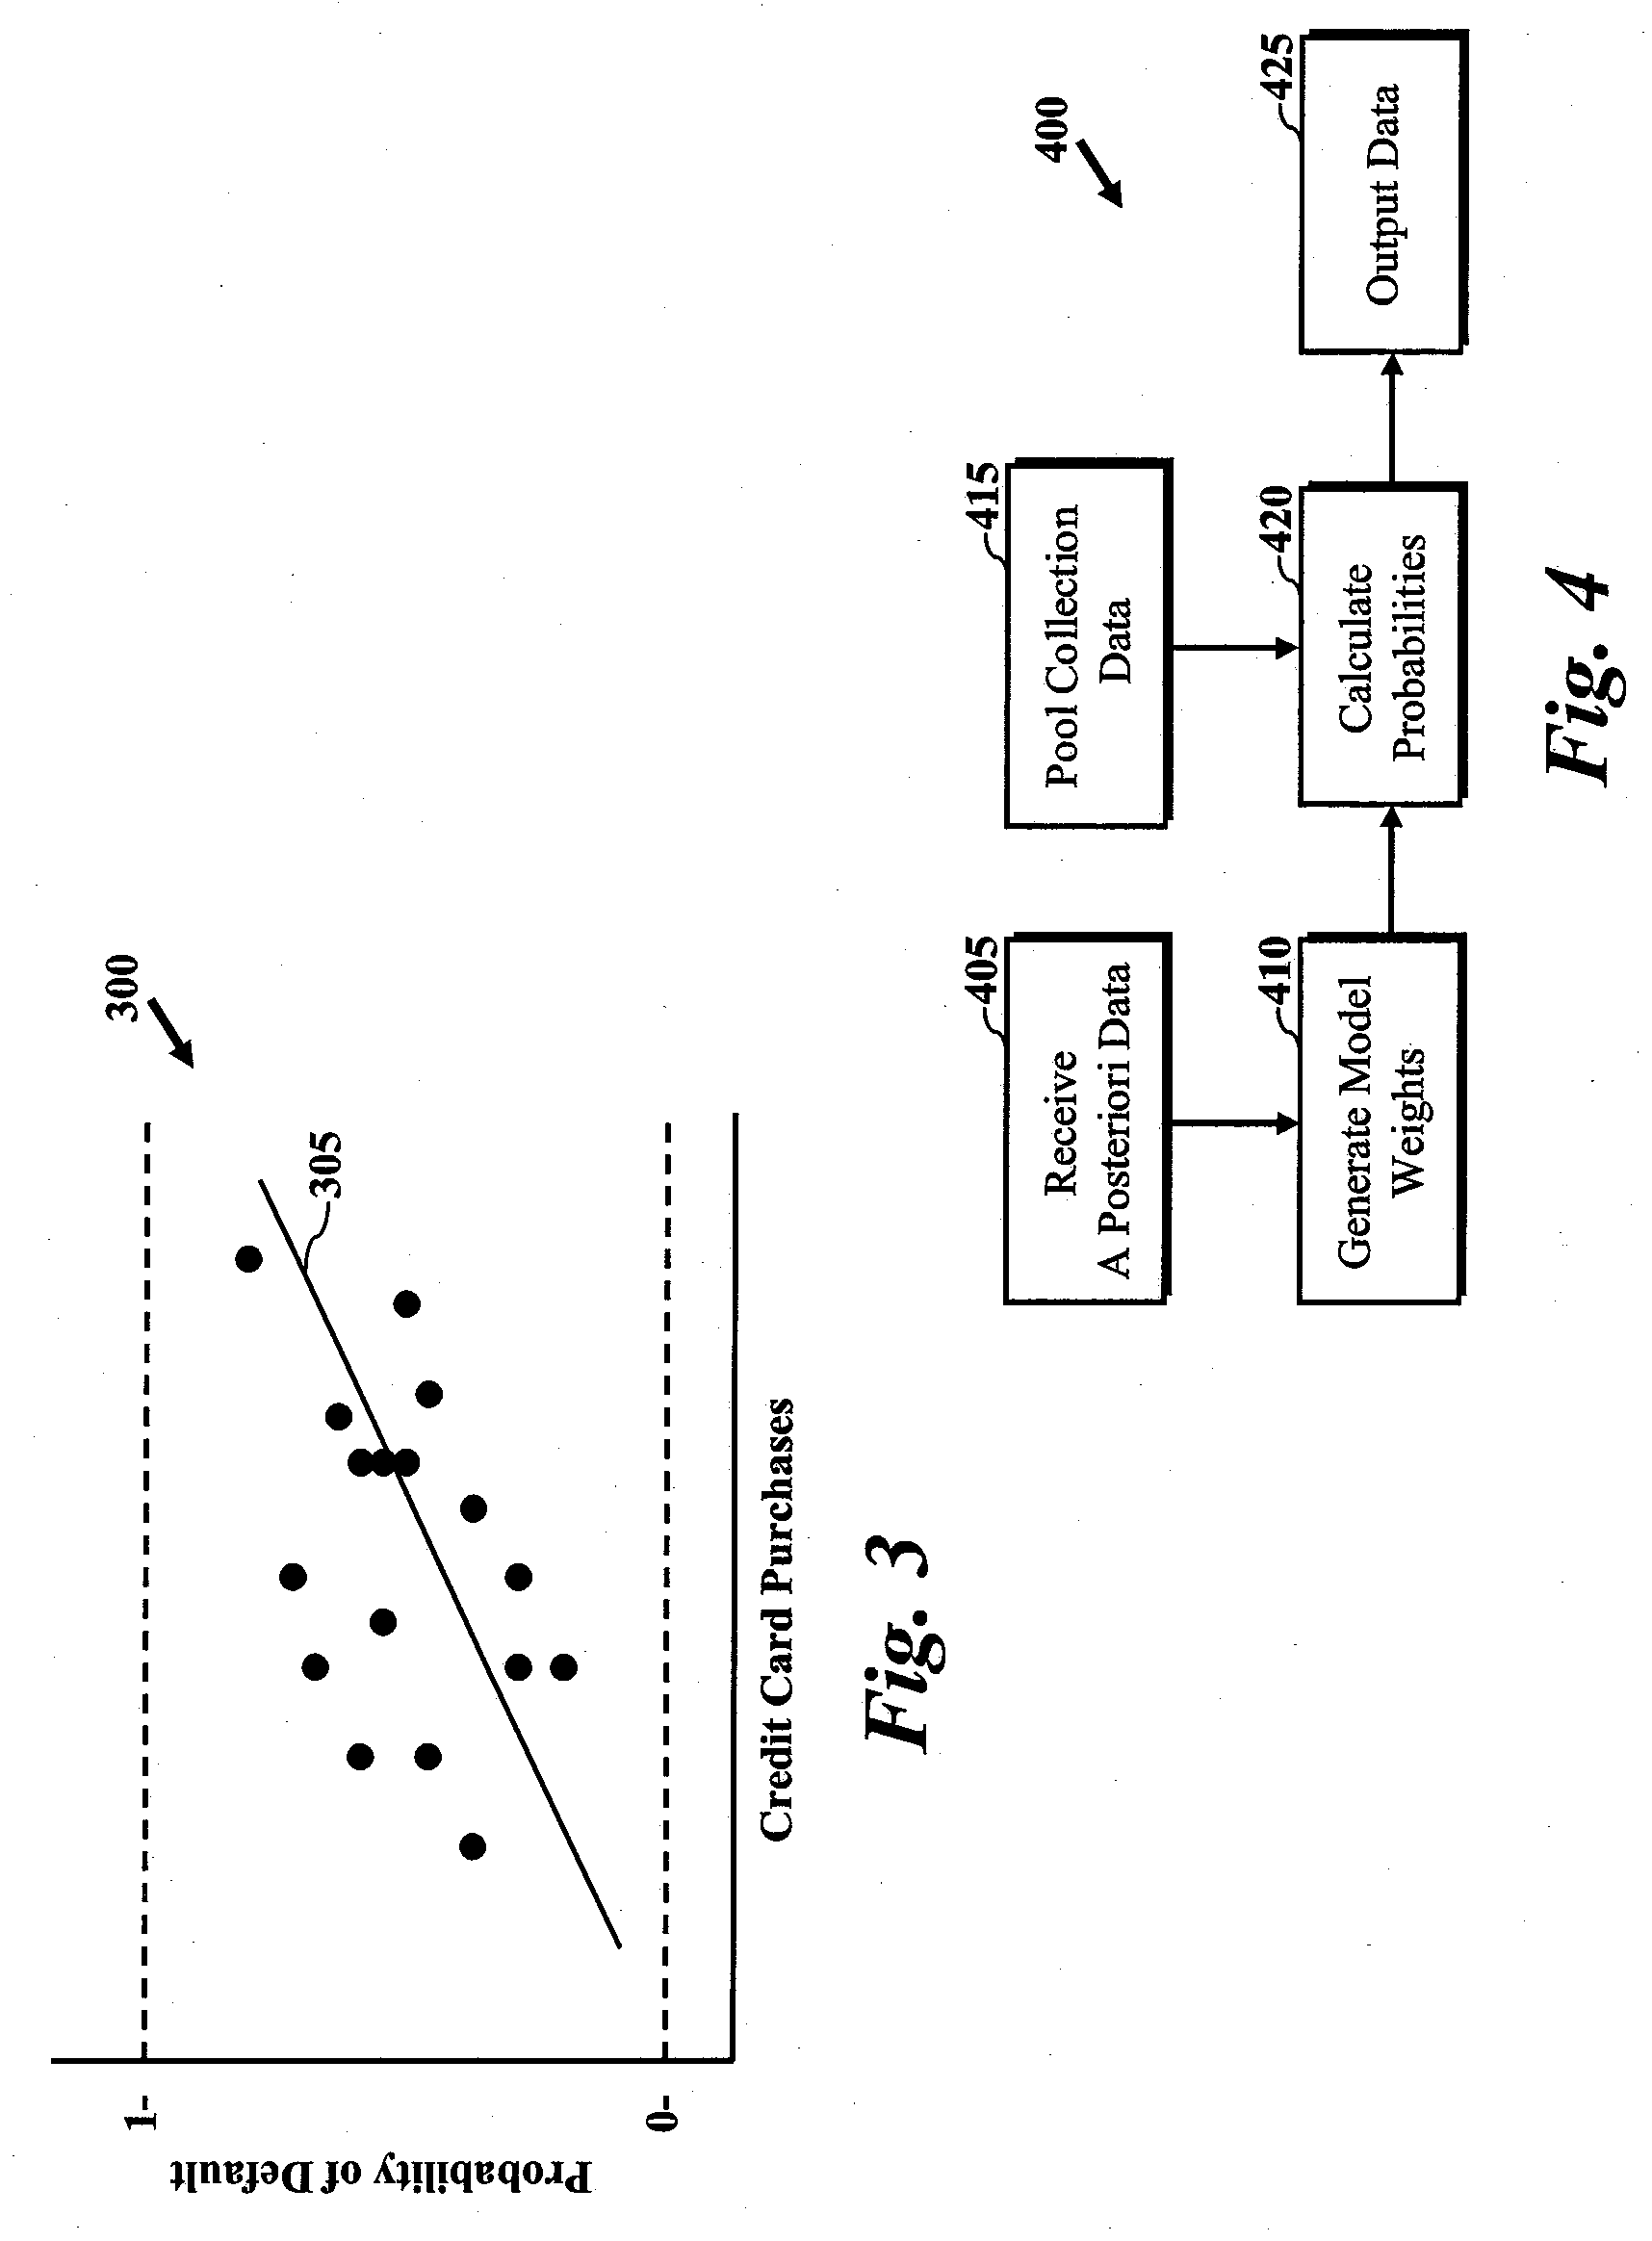 Method and Apparatus for Analyzing Data to Provide Decision Making Information